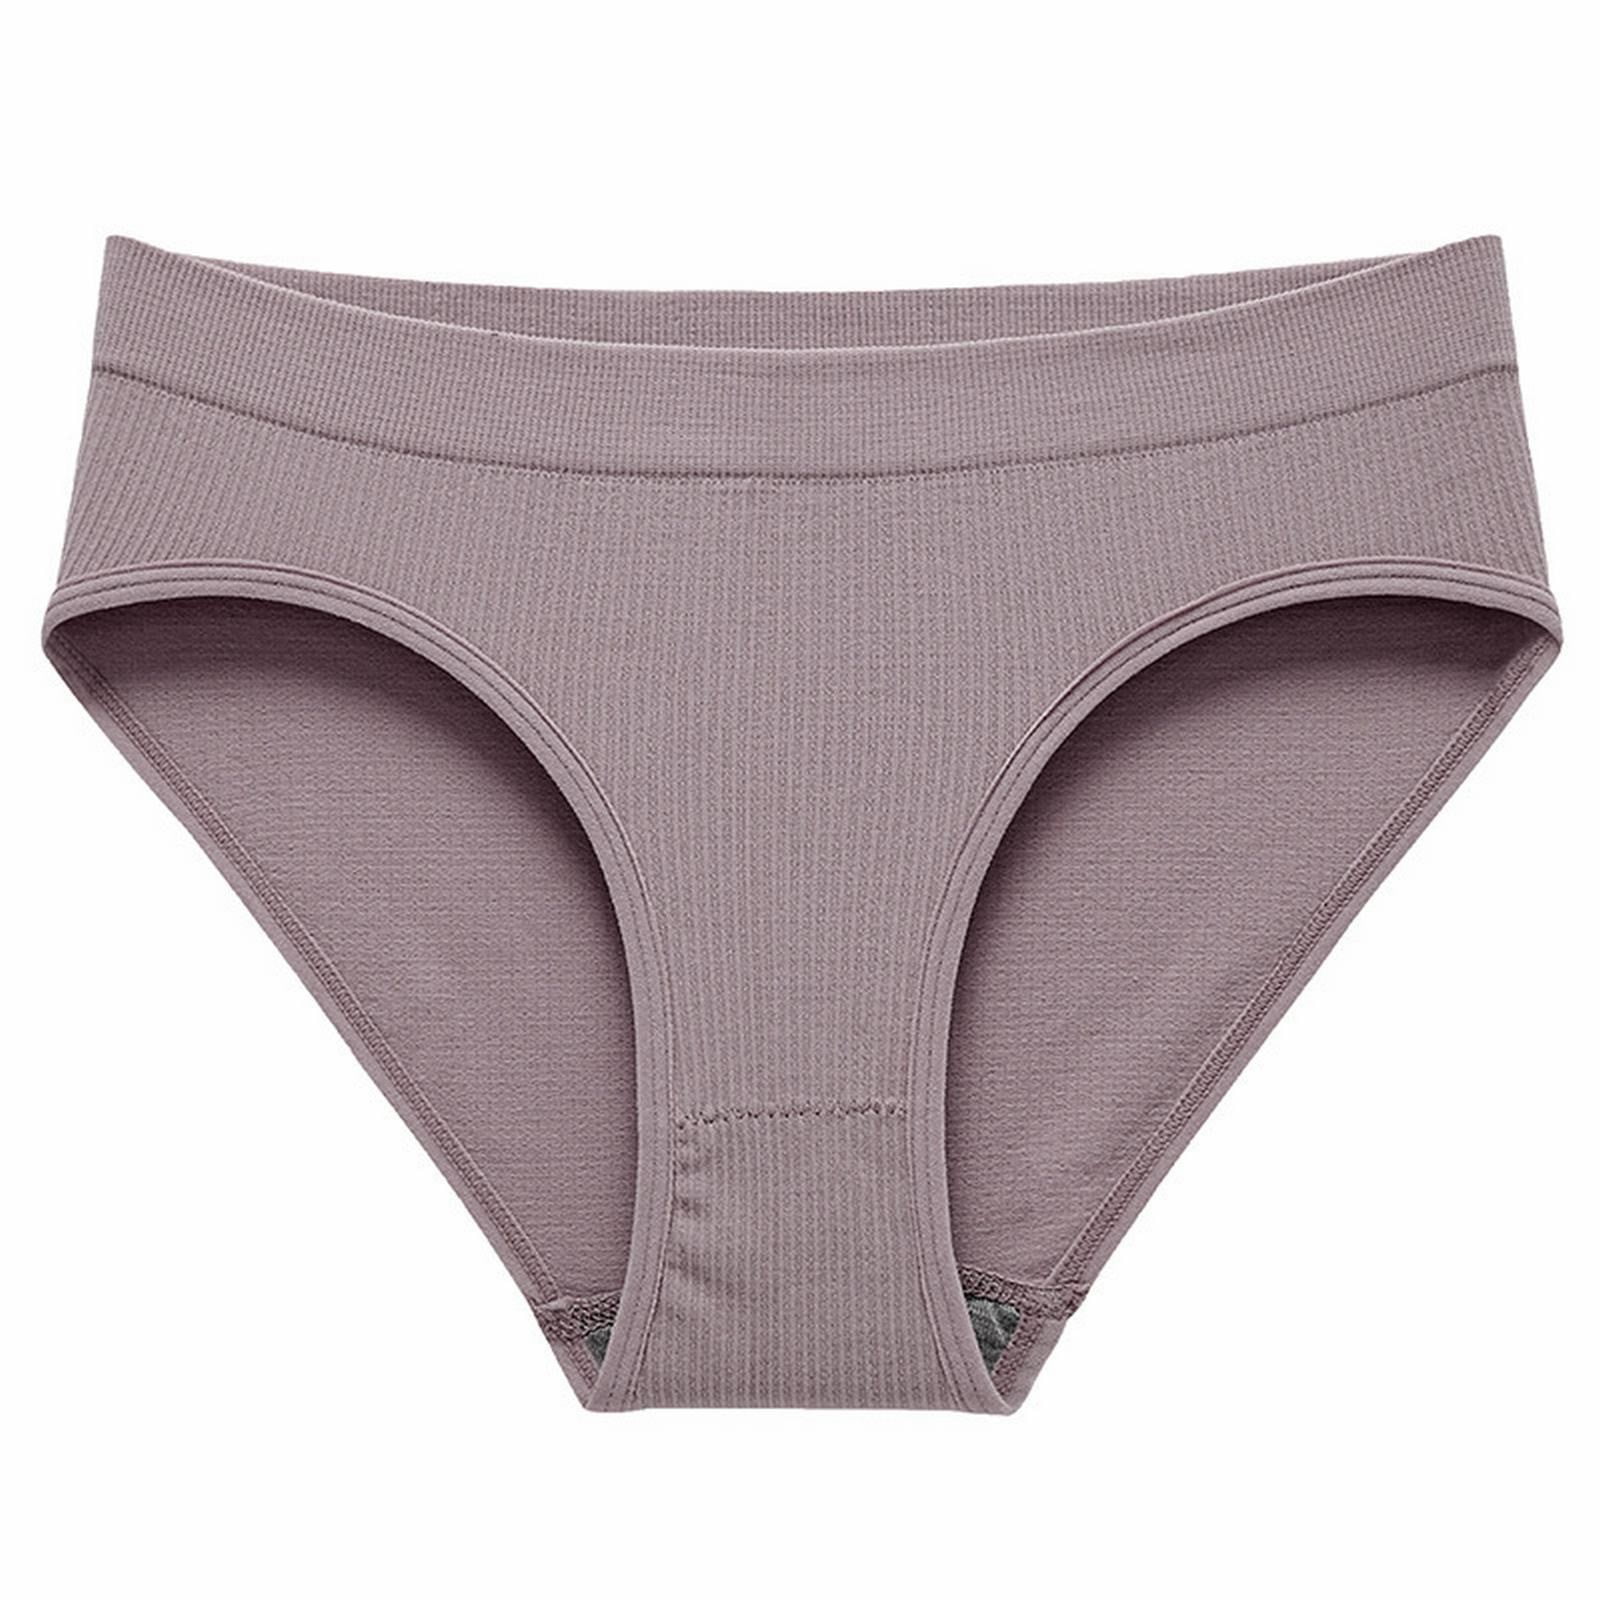 Buy Trendy Physiological Panties Sweat-absorbing Stretchy Underwear  Seamless Close Fit Panties for Daily Wear at affordable prices — free  shipping, real reviews with photos — Joom